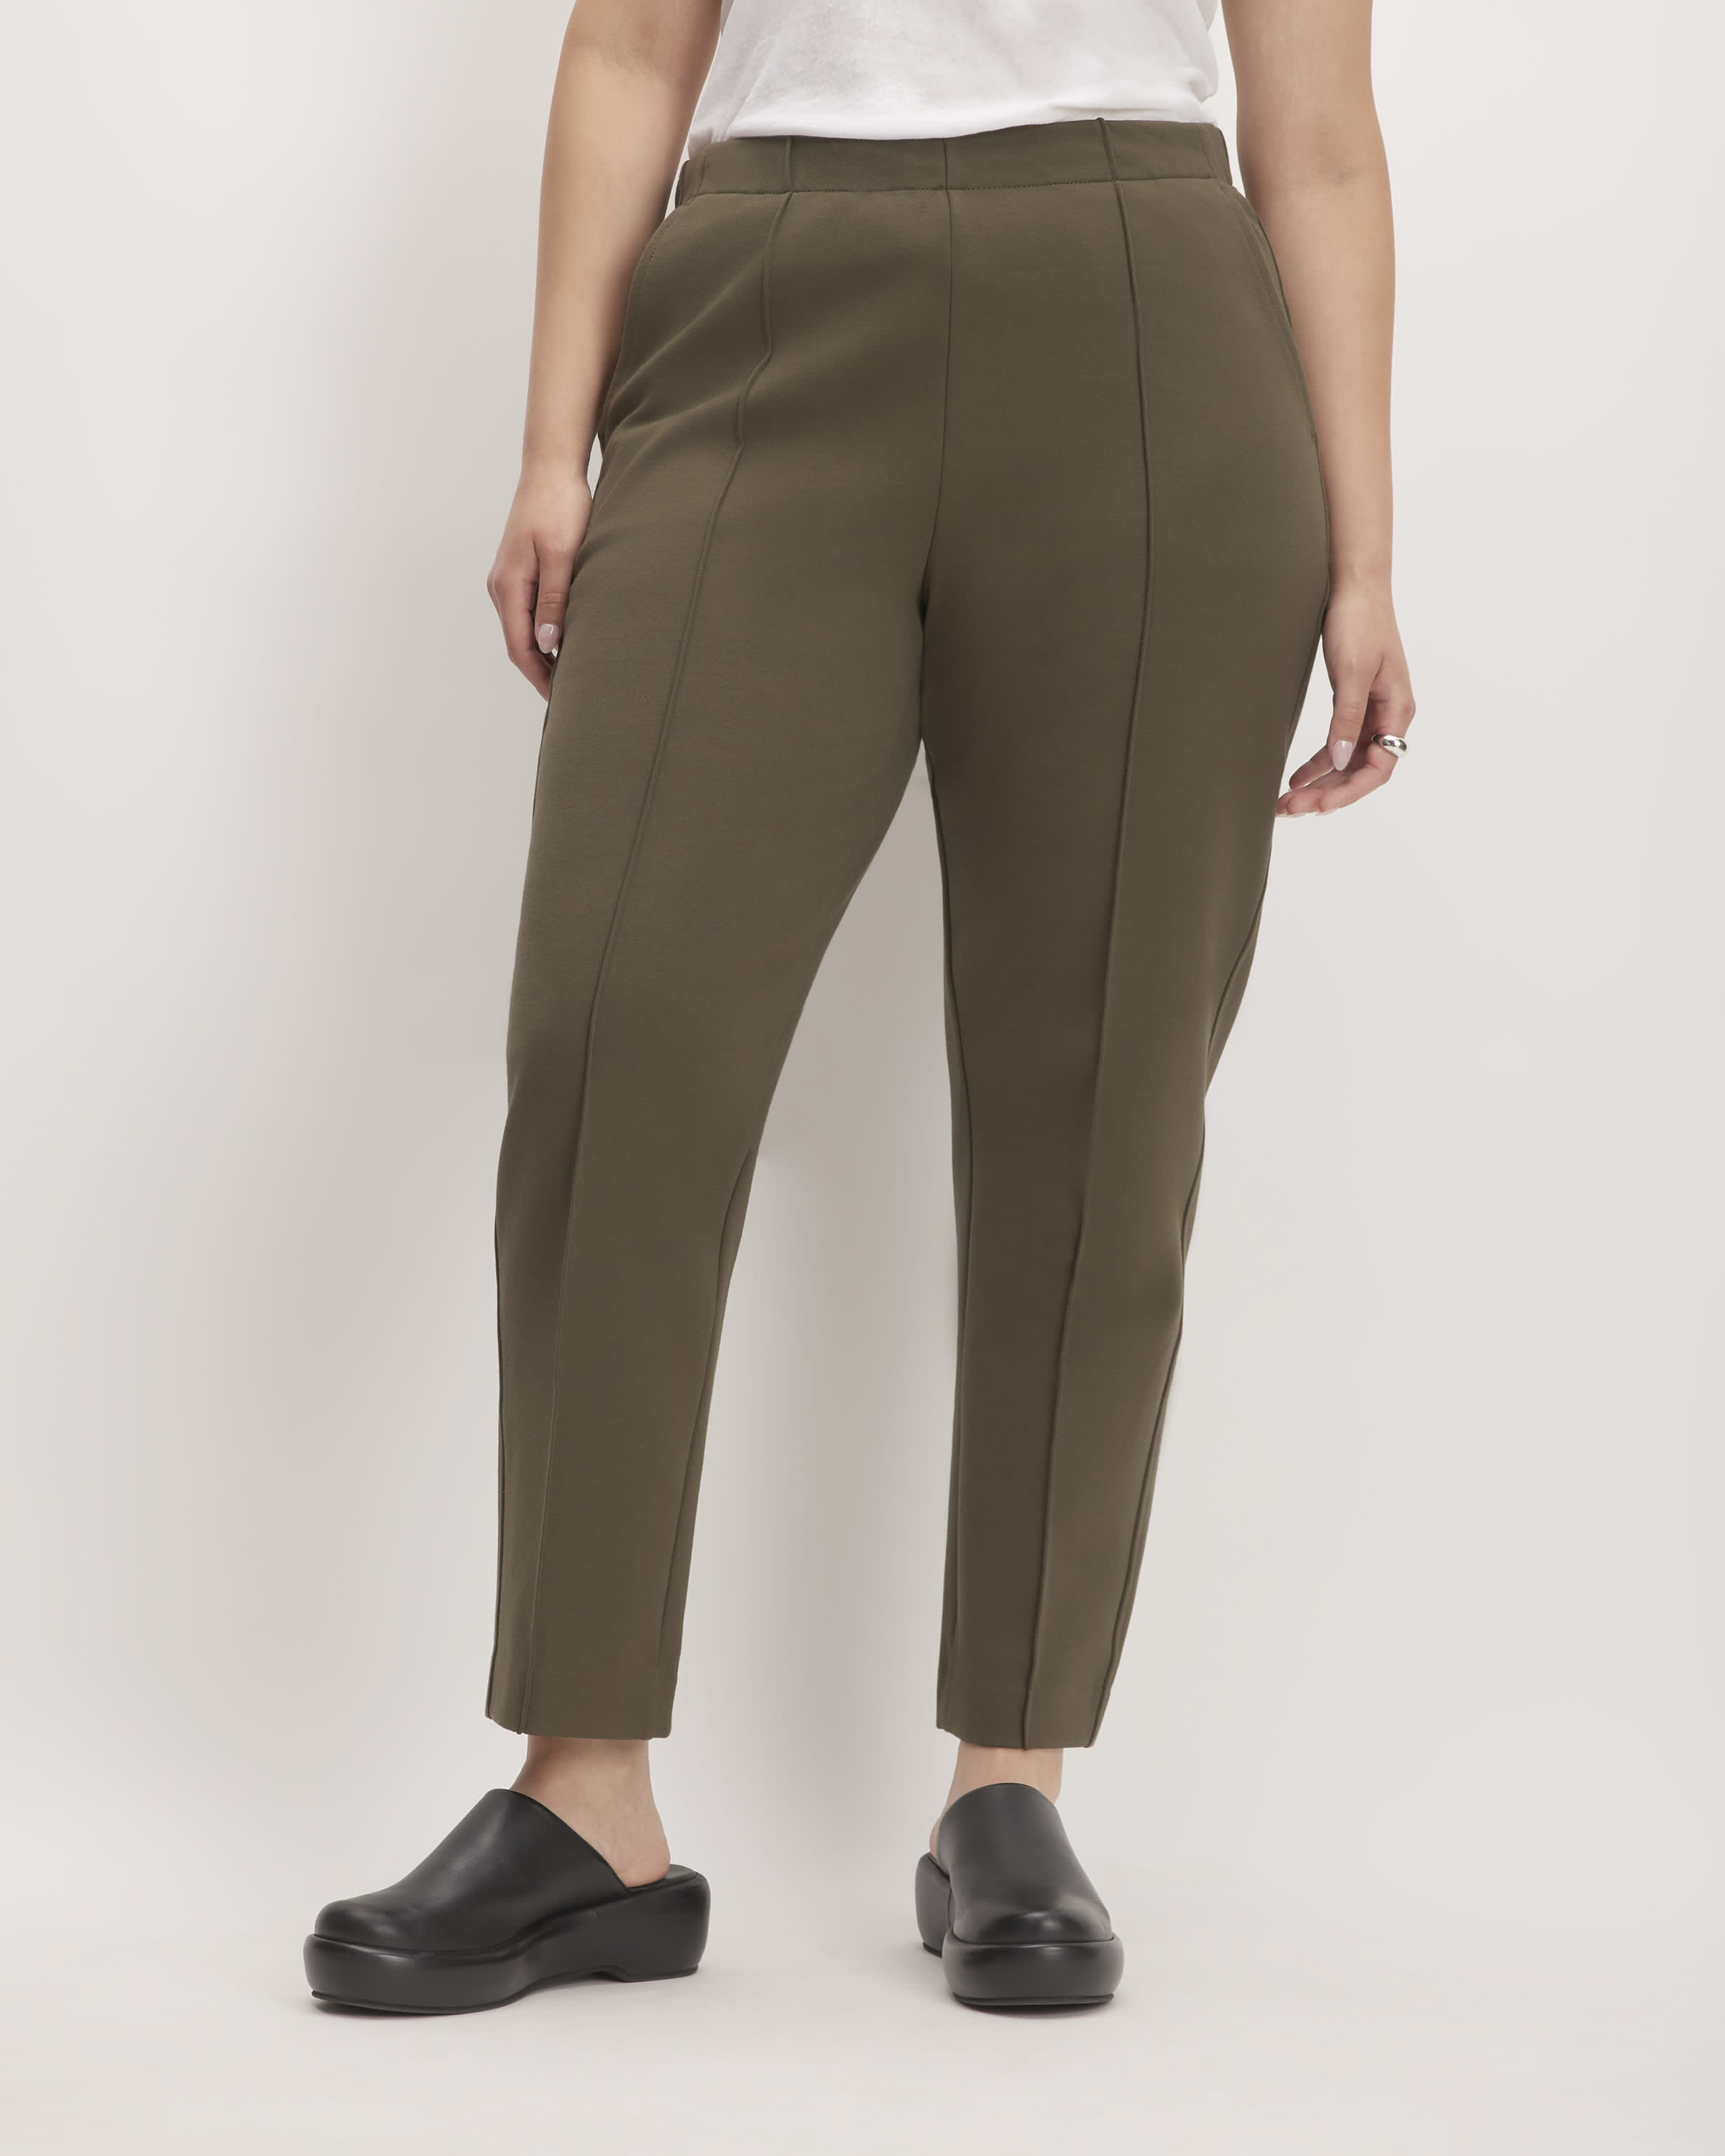 Gianna Pants - Forest Green | Mature Women's Clothing | TULIO Fashion